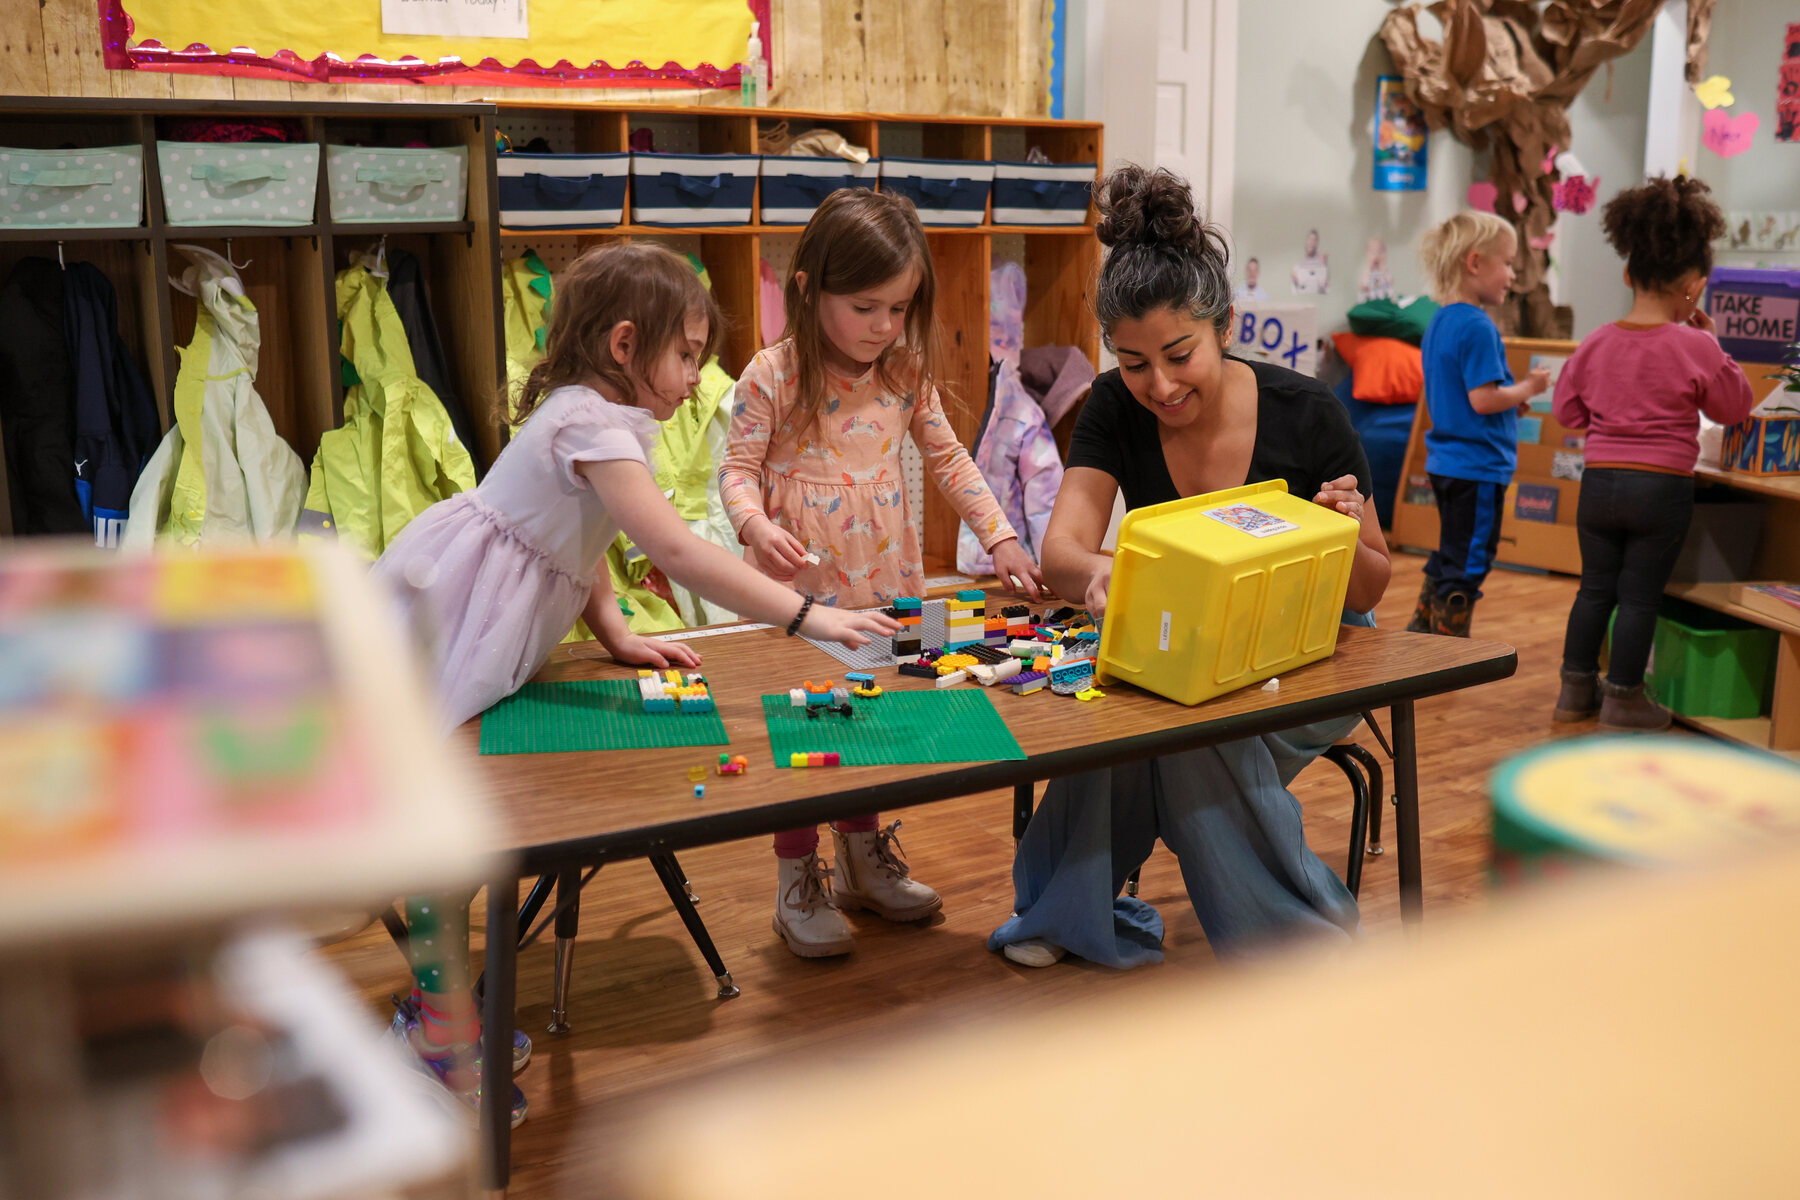 A woman works with two preschool students on a Lego project.